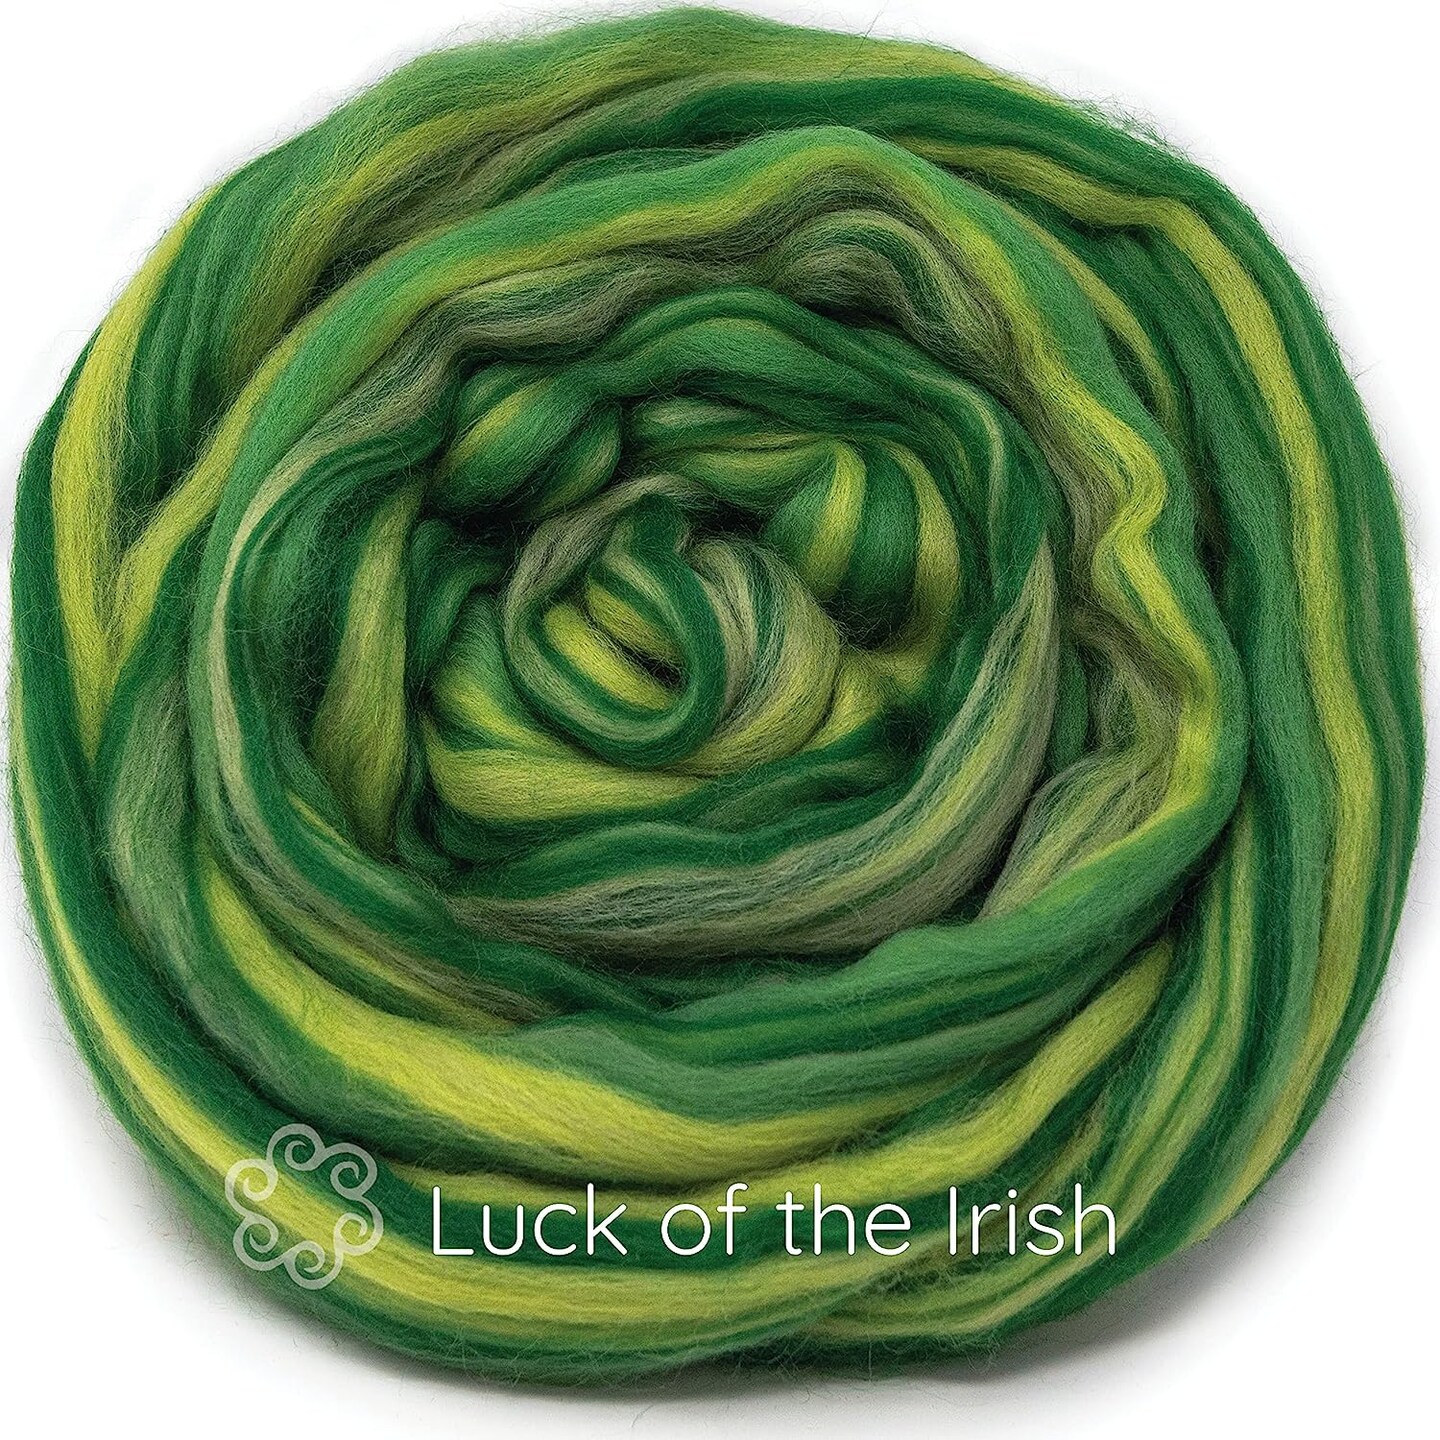 Buy Racing Green Giant Yarn. Arm Knitting Merino Wool. Roving for Spinning,  Felting and Fibre Art. Extreme Yarn for Knitting by Wool Couture Online in  India 